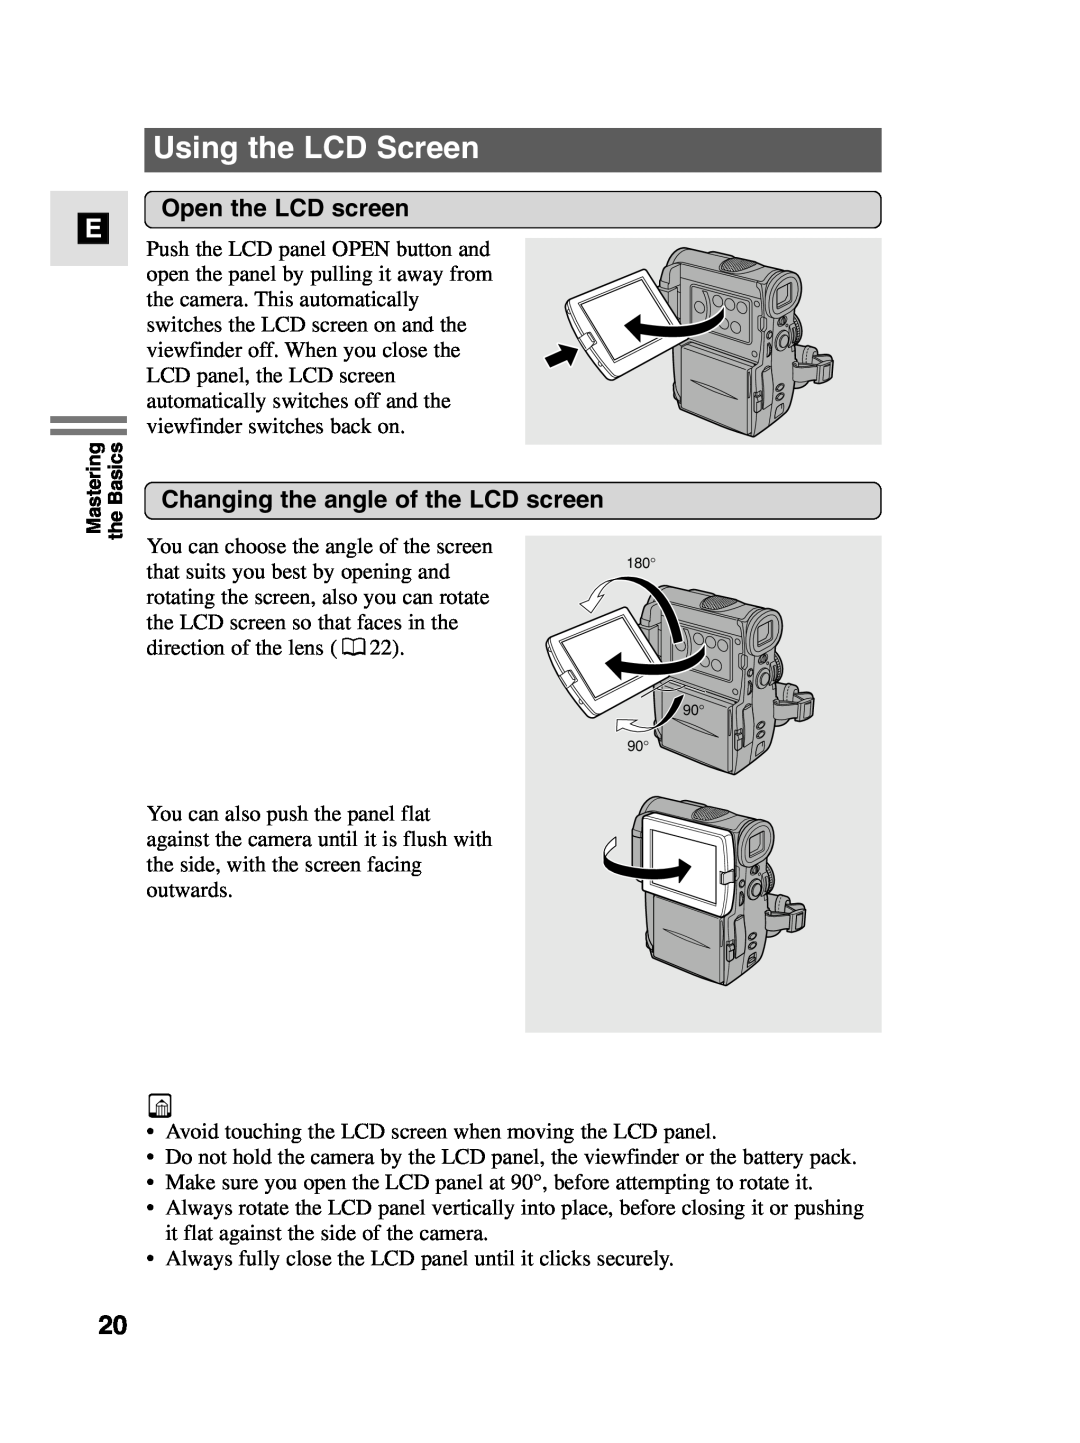 Canon MV4i MC instruction manual Using the LCD Screen, Open the LCD screen, Changing the angle of the LCD screen 